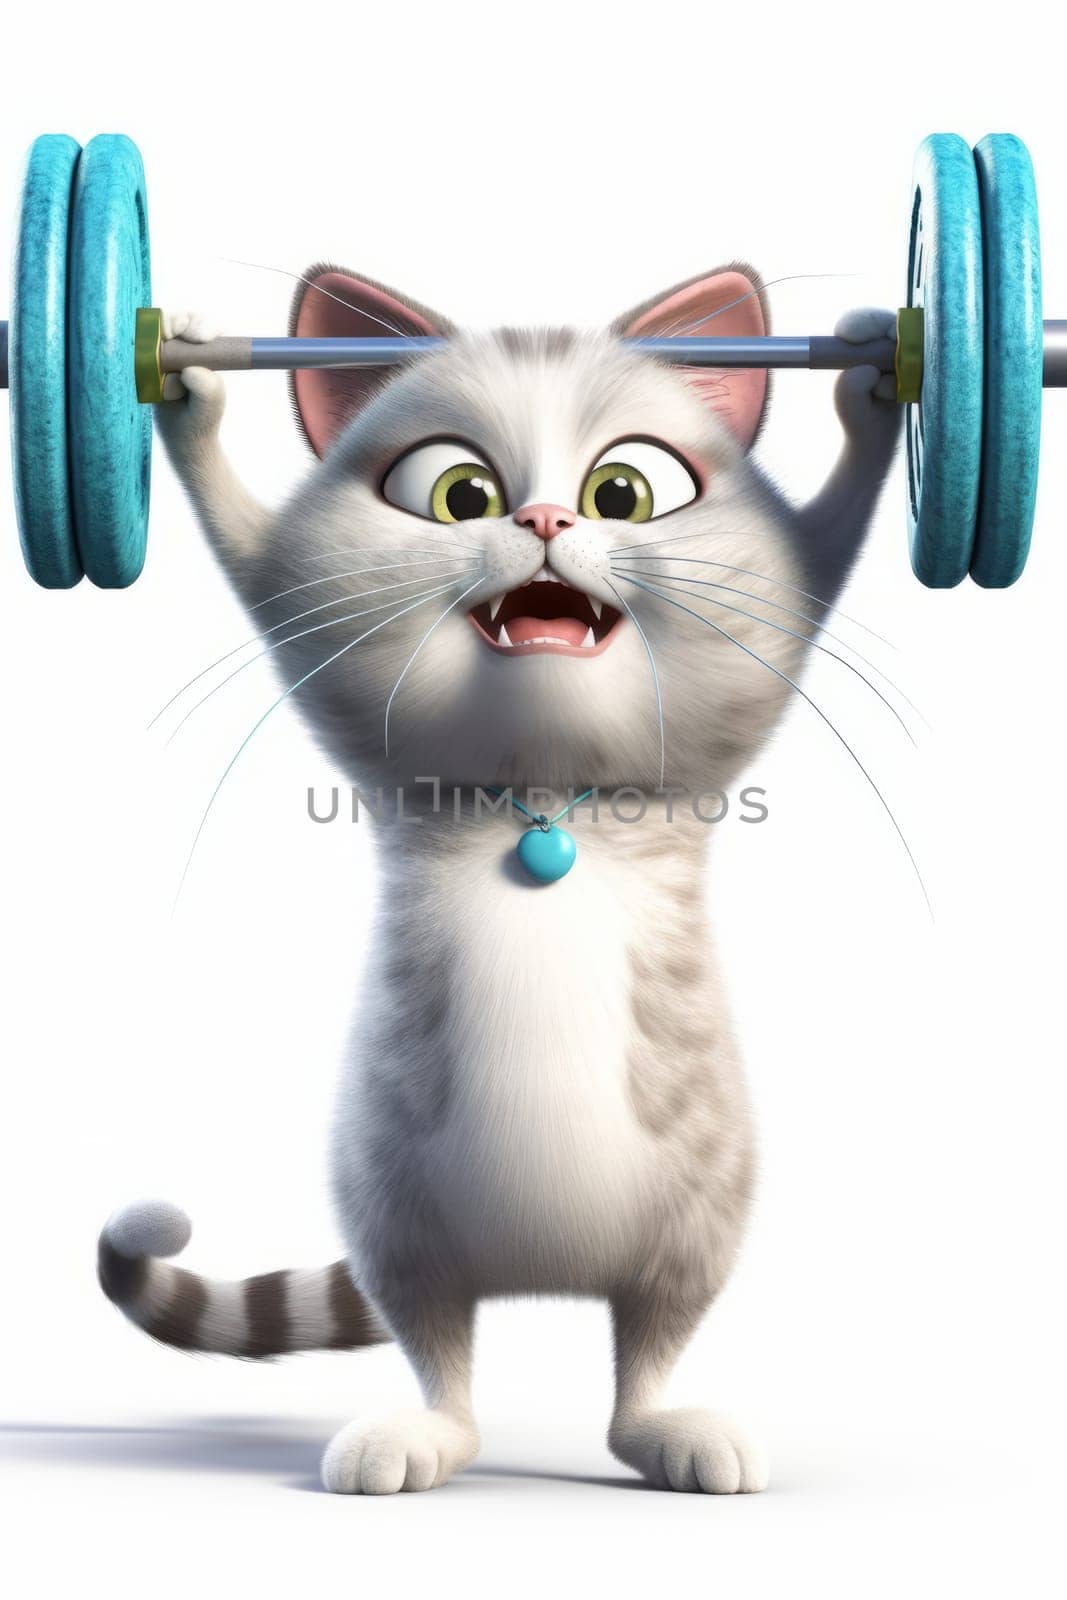 Funny cartoon kitten lifts a blue barbell standing on a white background by Zakharova